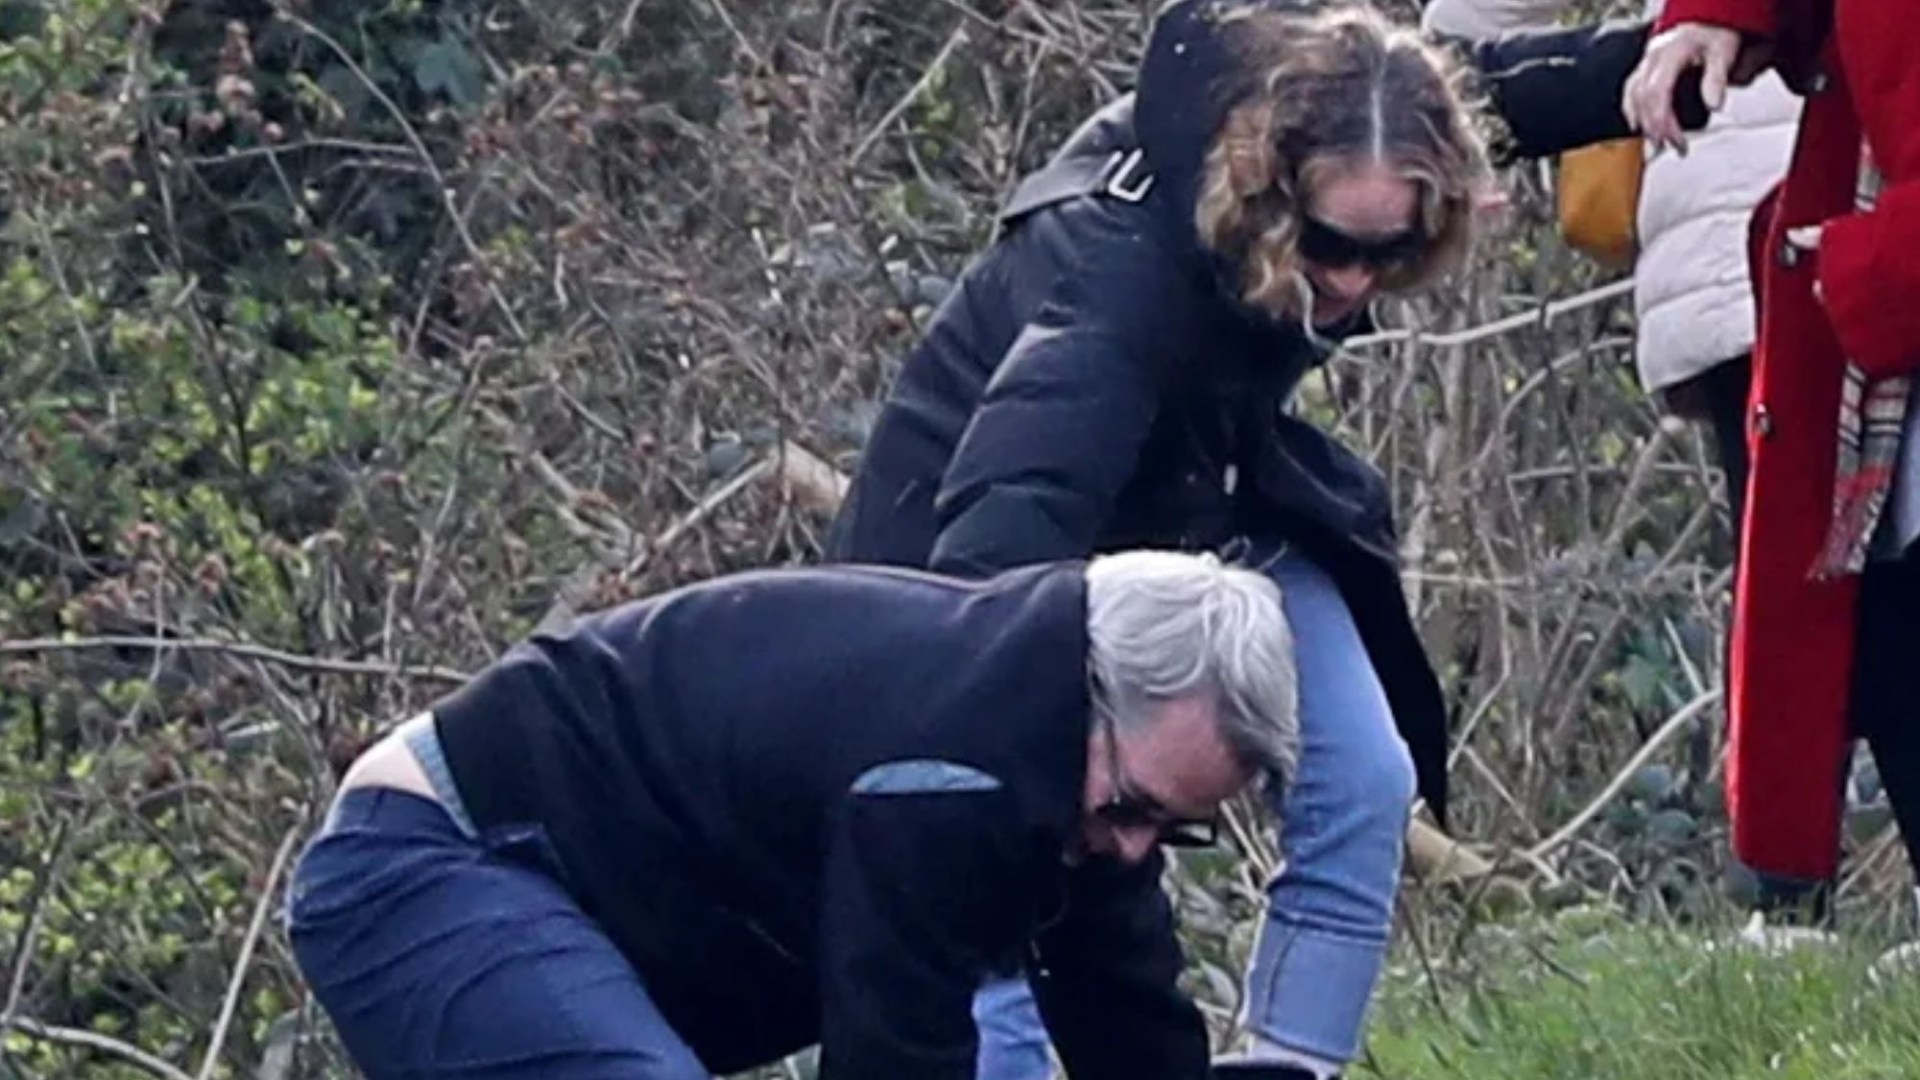 Sarah Jessica Parker and husband Matthew Broderick conquer London slopes in a muddy walk – SEO expert approved!